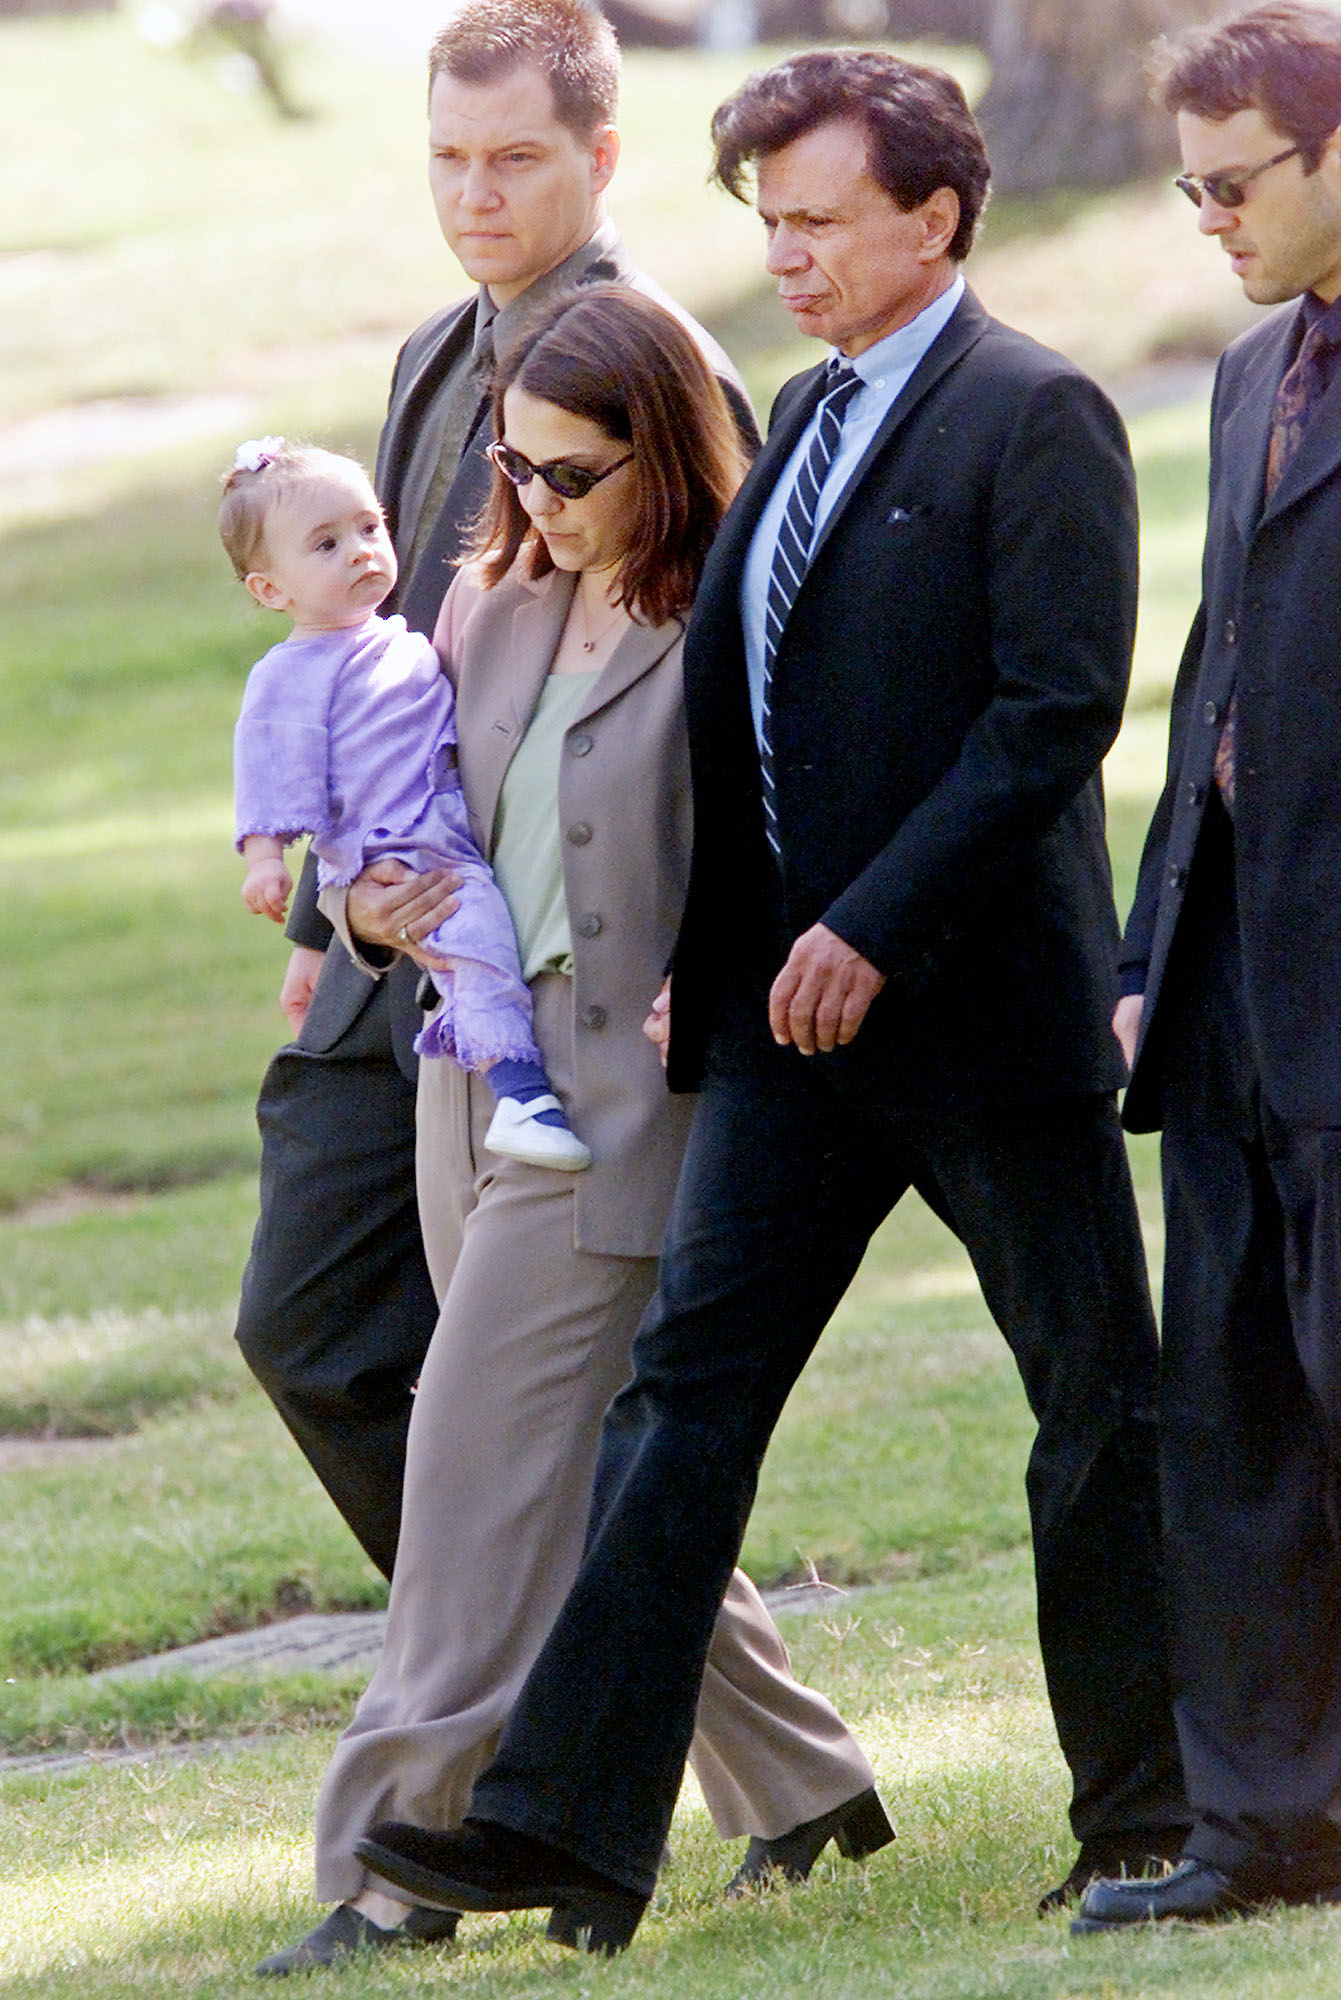 (L-R) Unidentified man, Delinah Blake holding Rose Lenore Blake, Robert Blake, and Noah Blake walk to the gravesite of Bonny Lee Bakley during a brief funeral ceremony on May 25, 2001, in Los Angeles, California. | Source: Getty Images